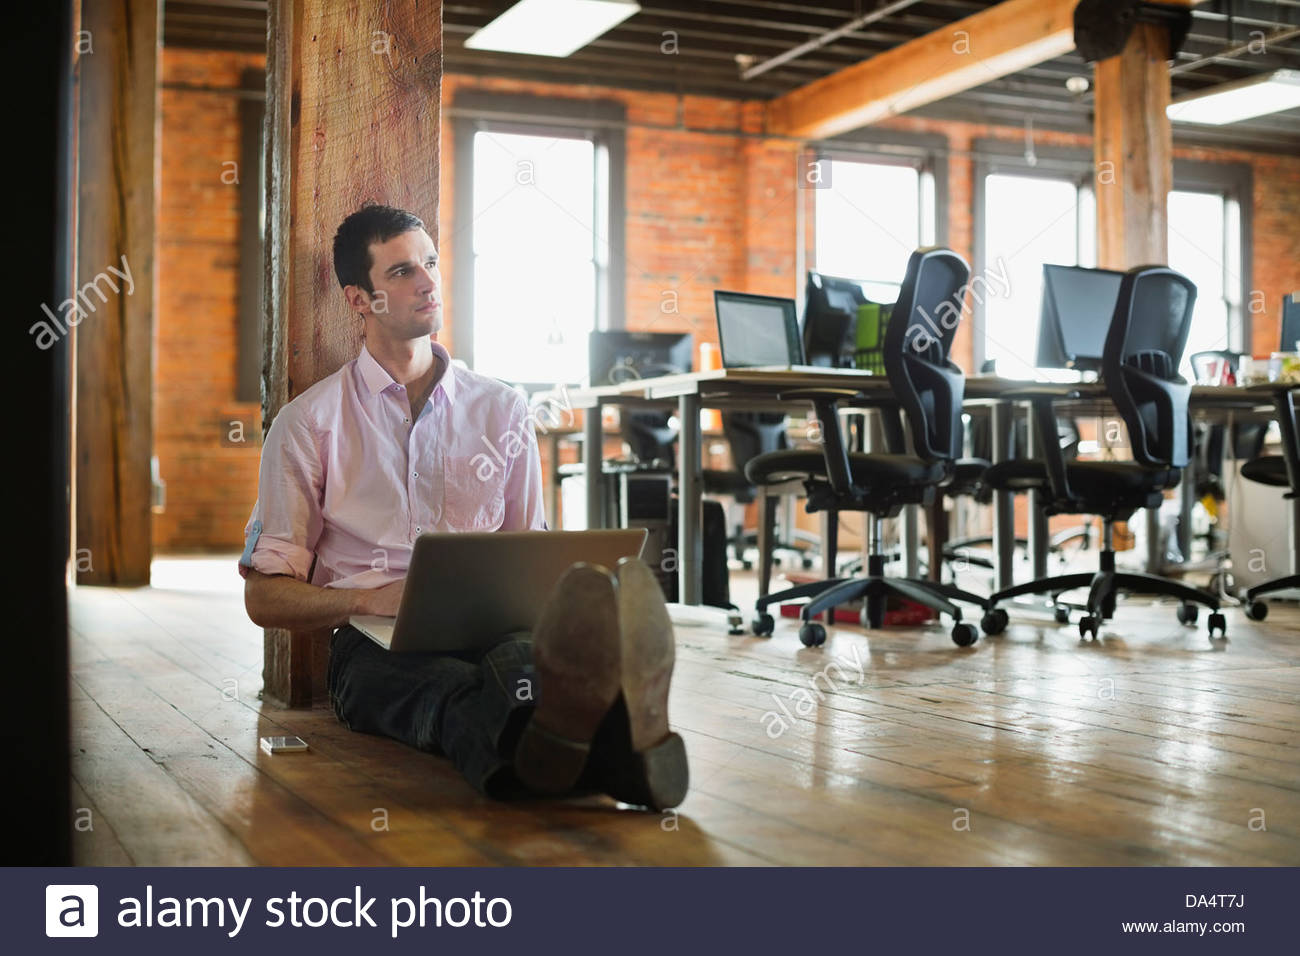 Entrepreneur working on laptop in creative office space Banque D'Images